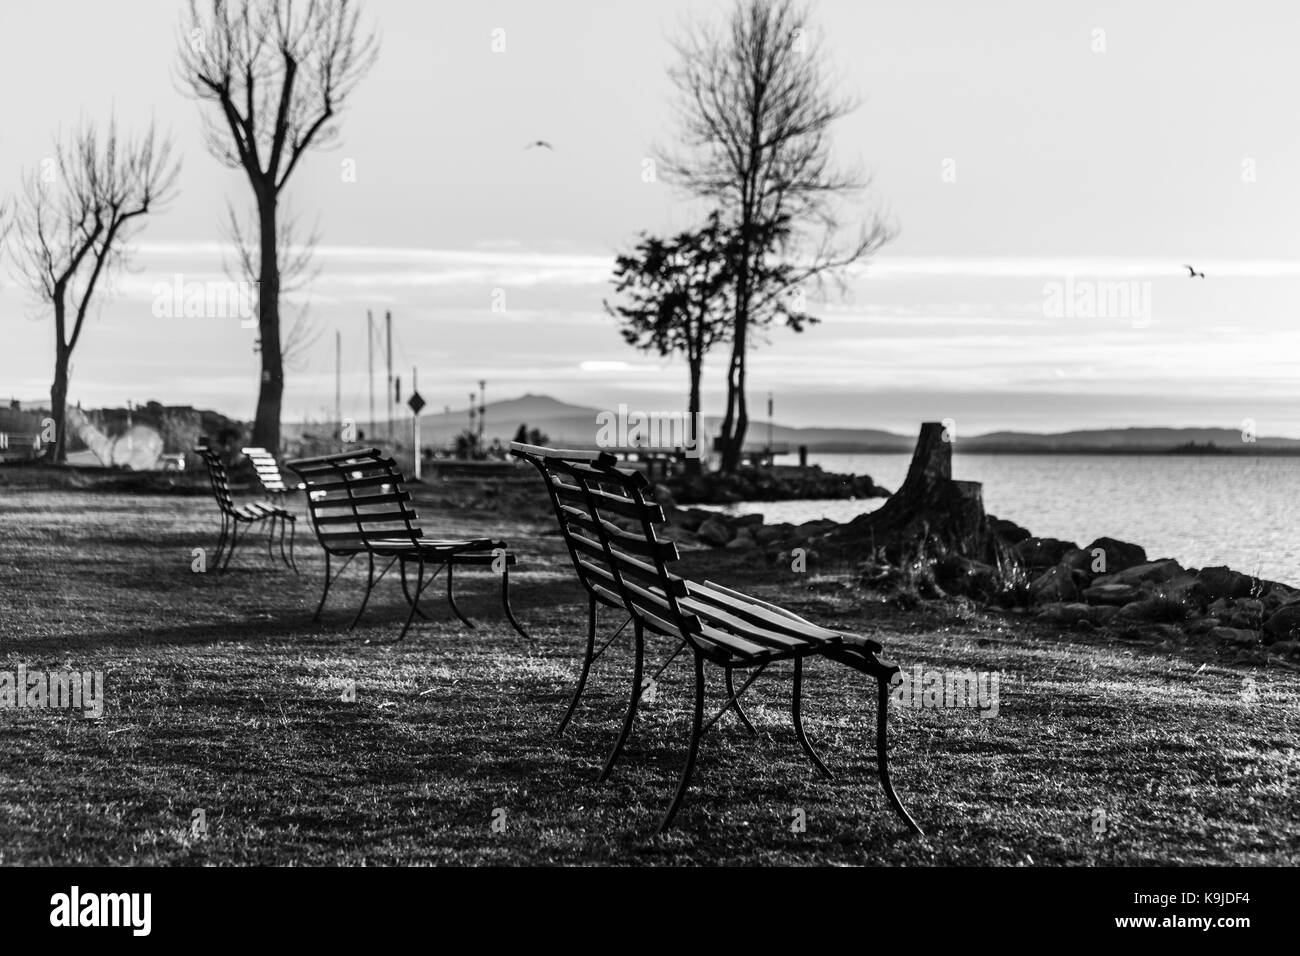 Sitting benches on a lake shore Stock Photo